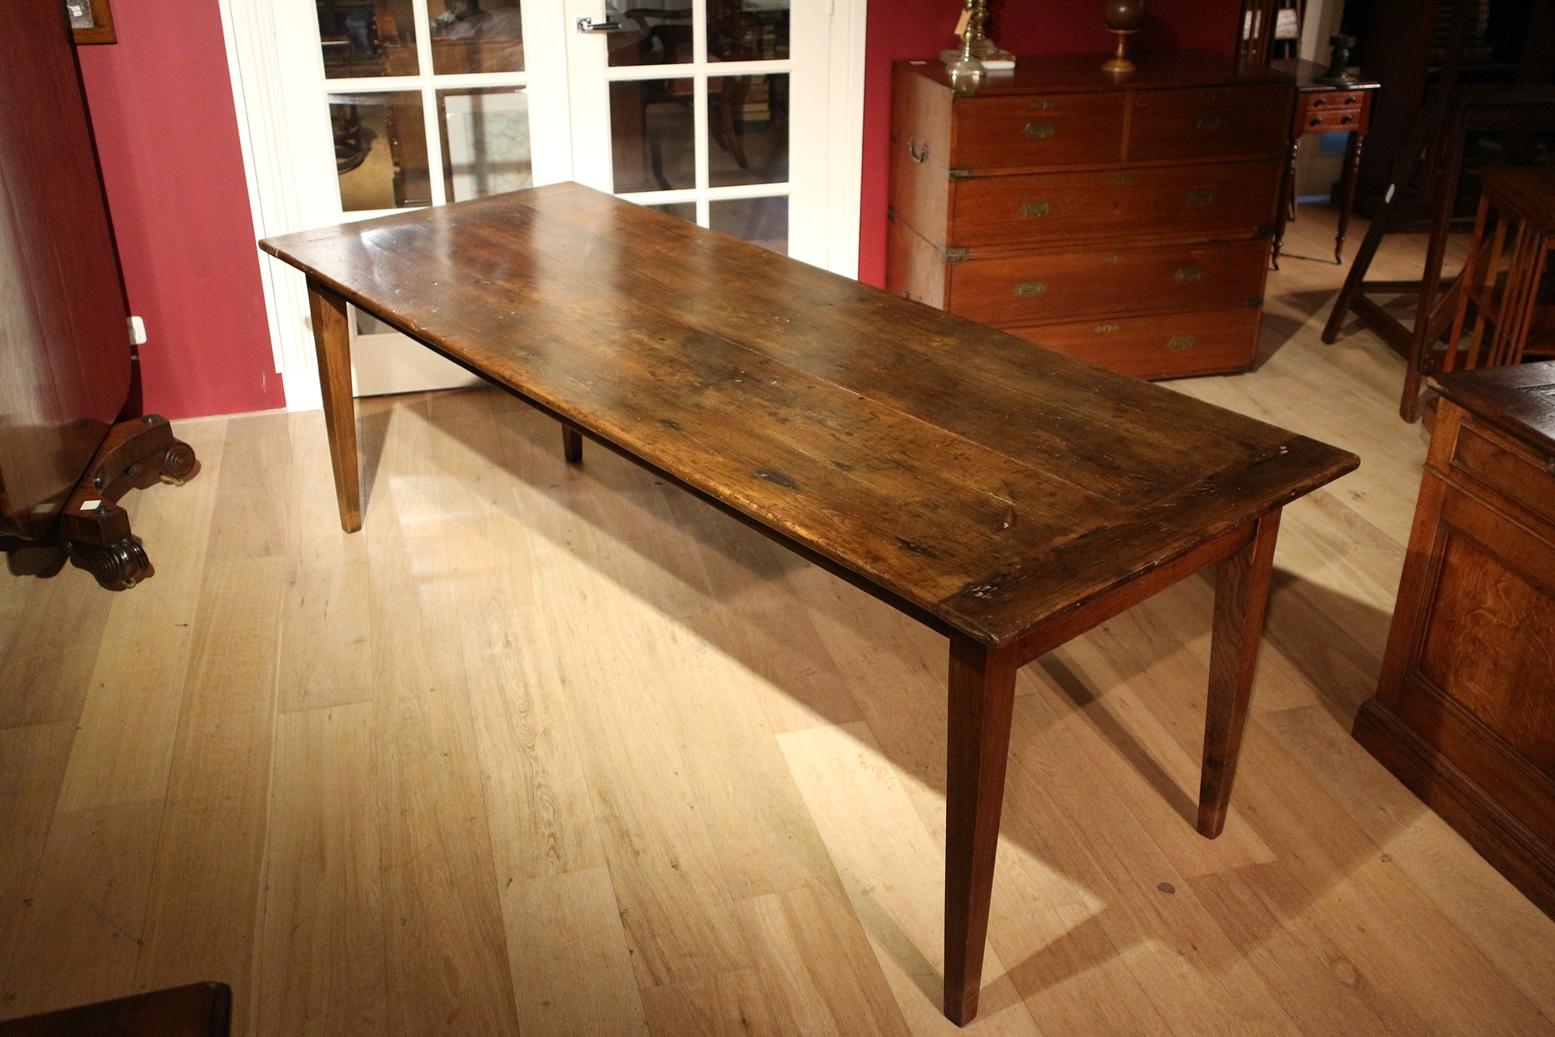 Beautiful large antique French chestnut table. Table is in perfect condition. The table has a drawer at the front. And a pull-out leaf on the other side. Beautifully aged top with a warm colour. Legroom 65 cm

Origin: France
Period: approx.